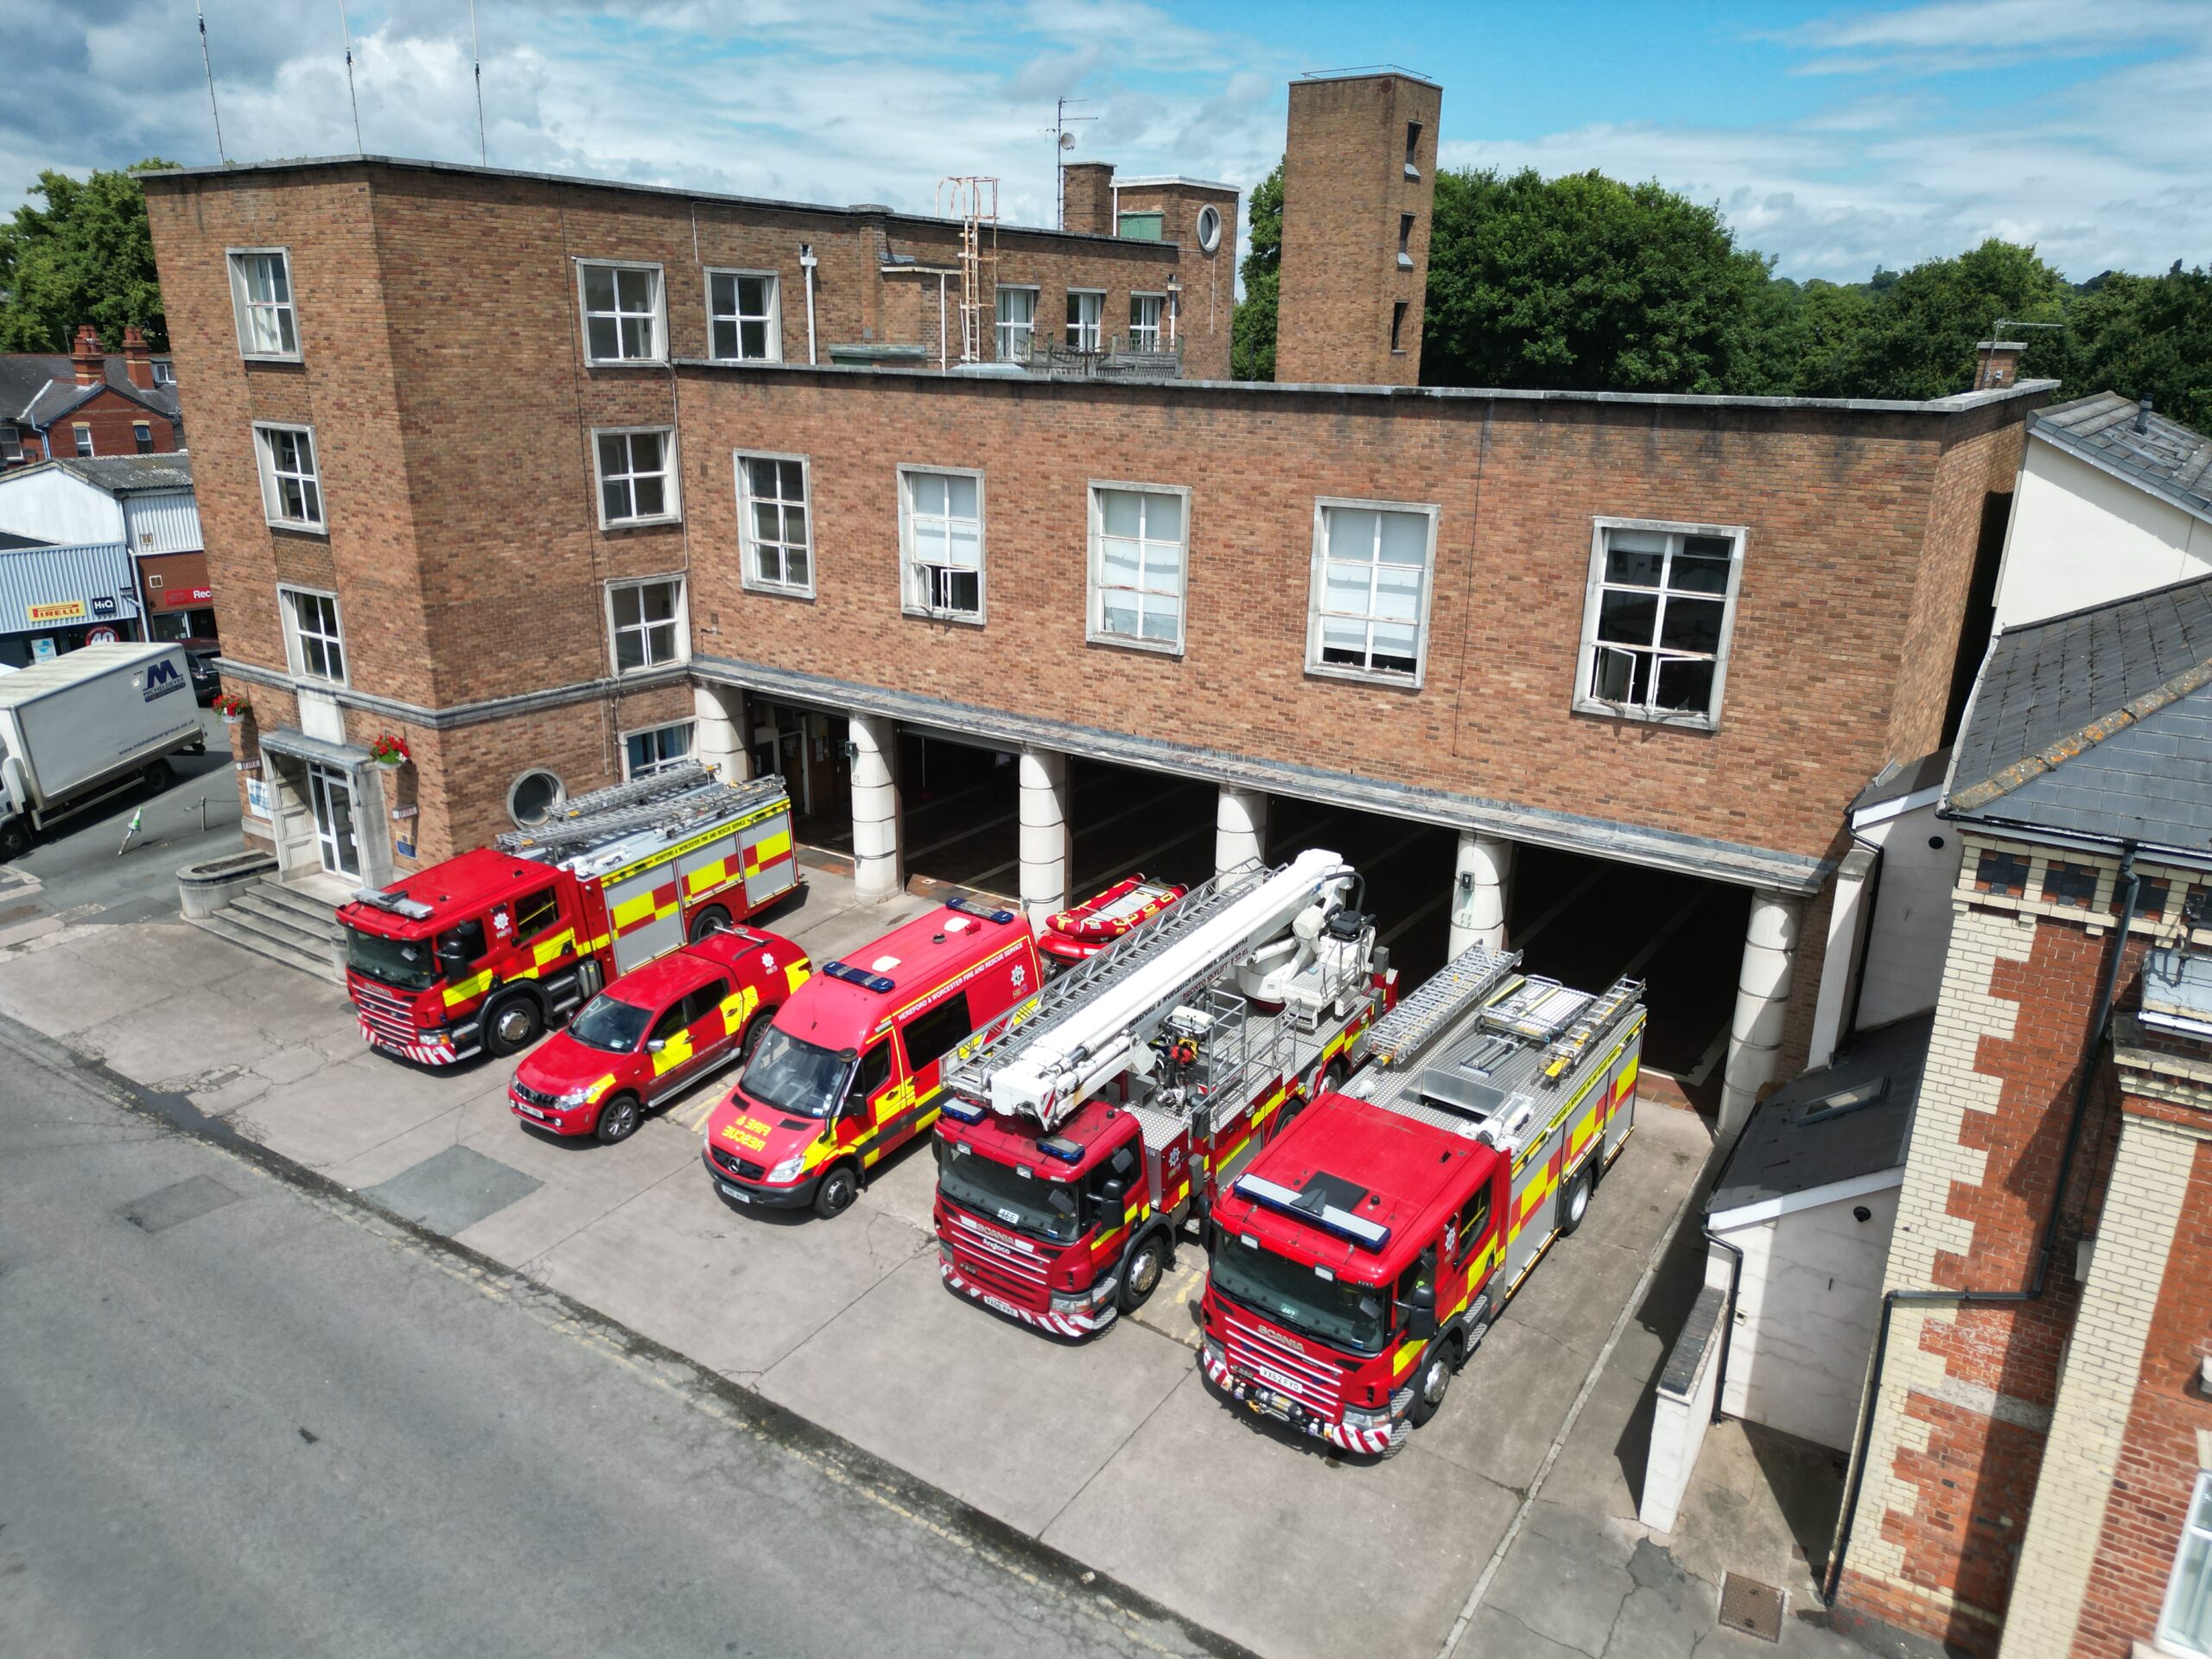 image taken from drone of Hereford fleet of fire vehicles